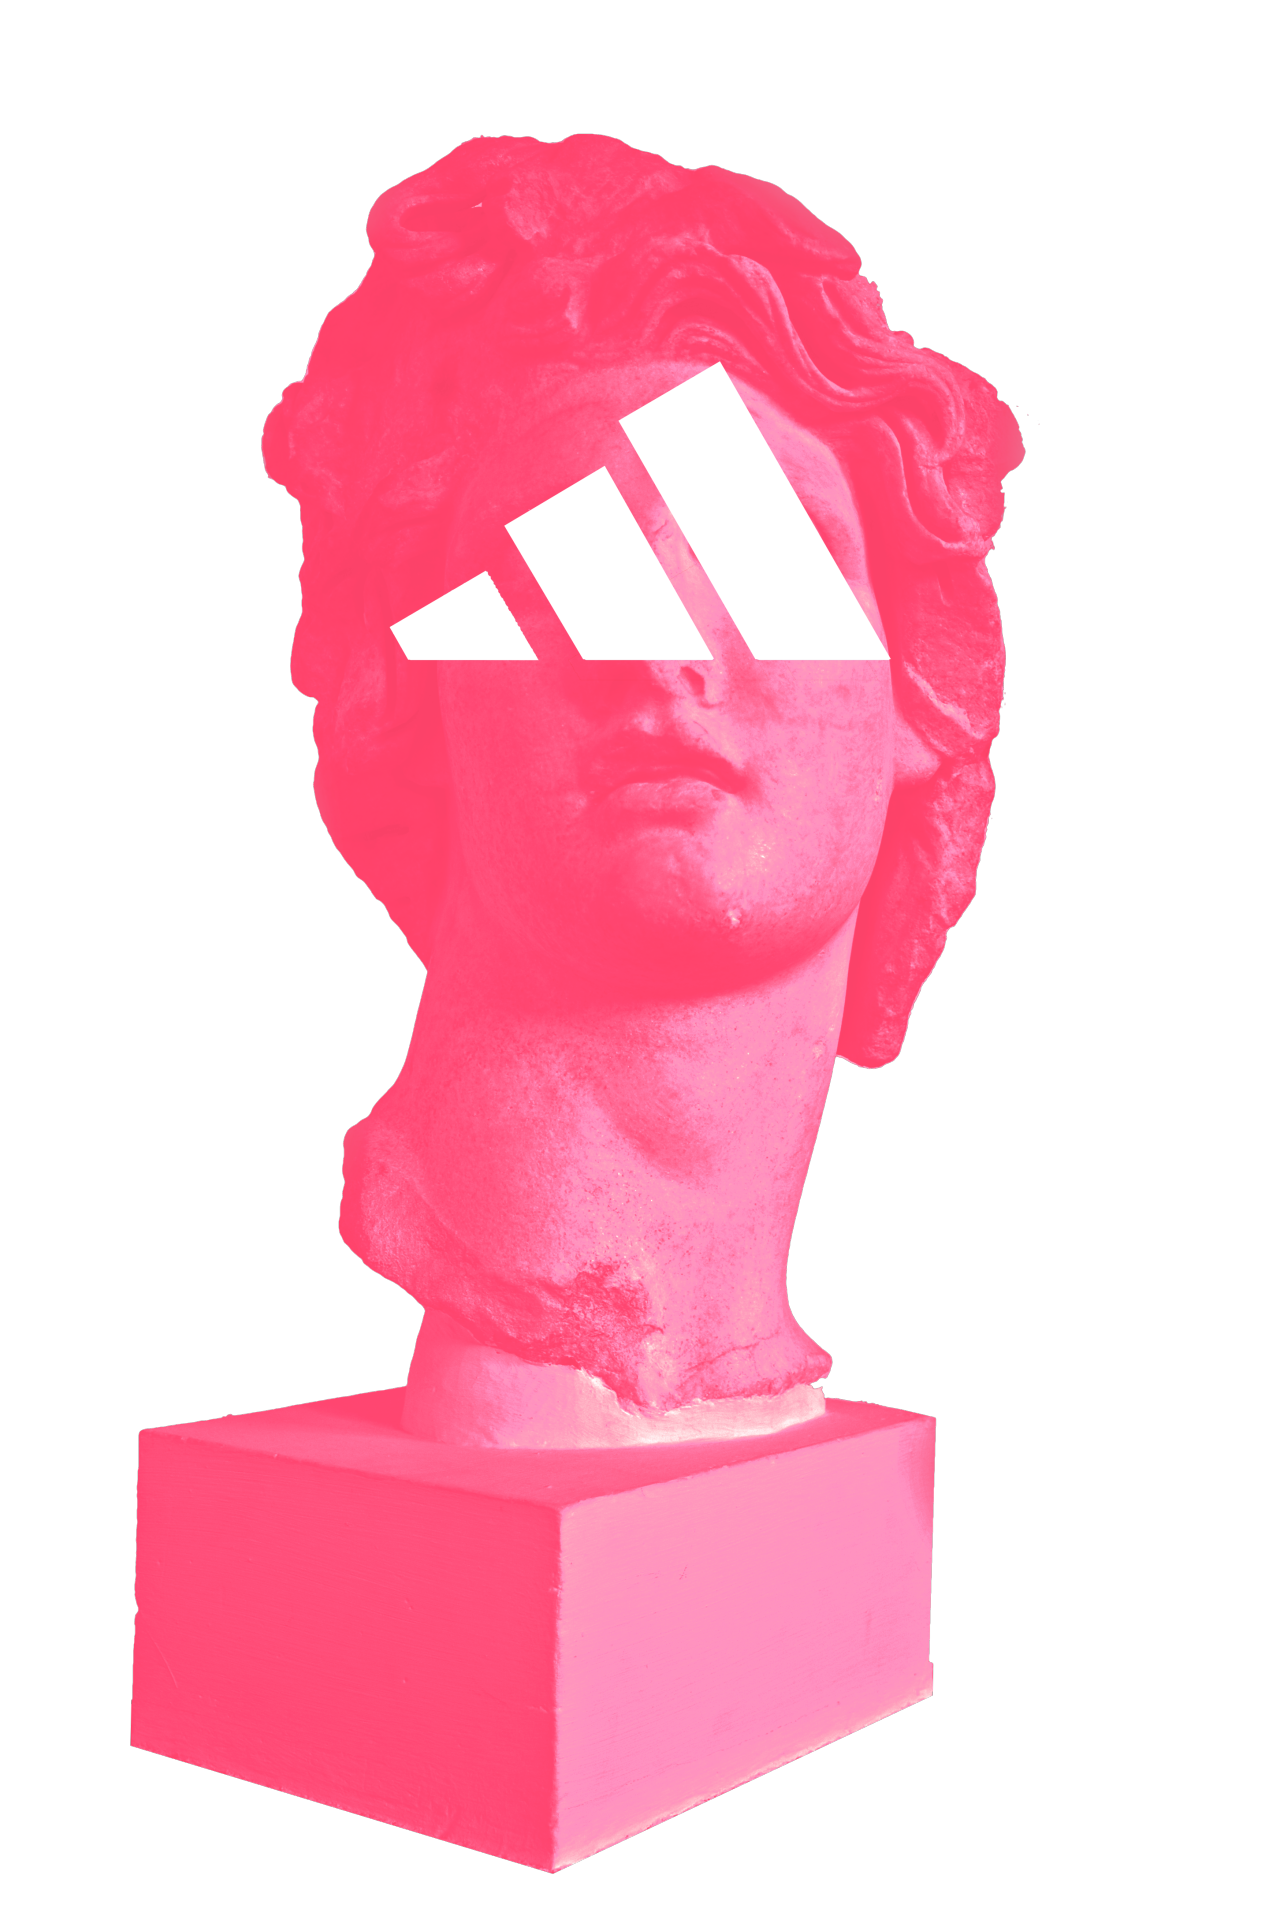 Vaporwave png pic #43643 - Free Icons and PNG Backgrounds